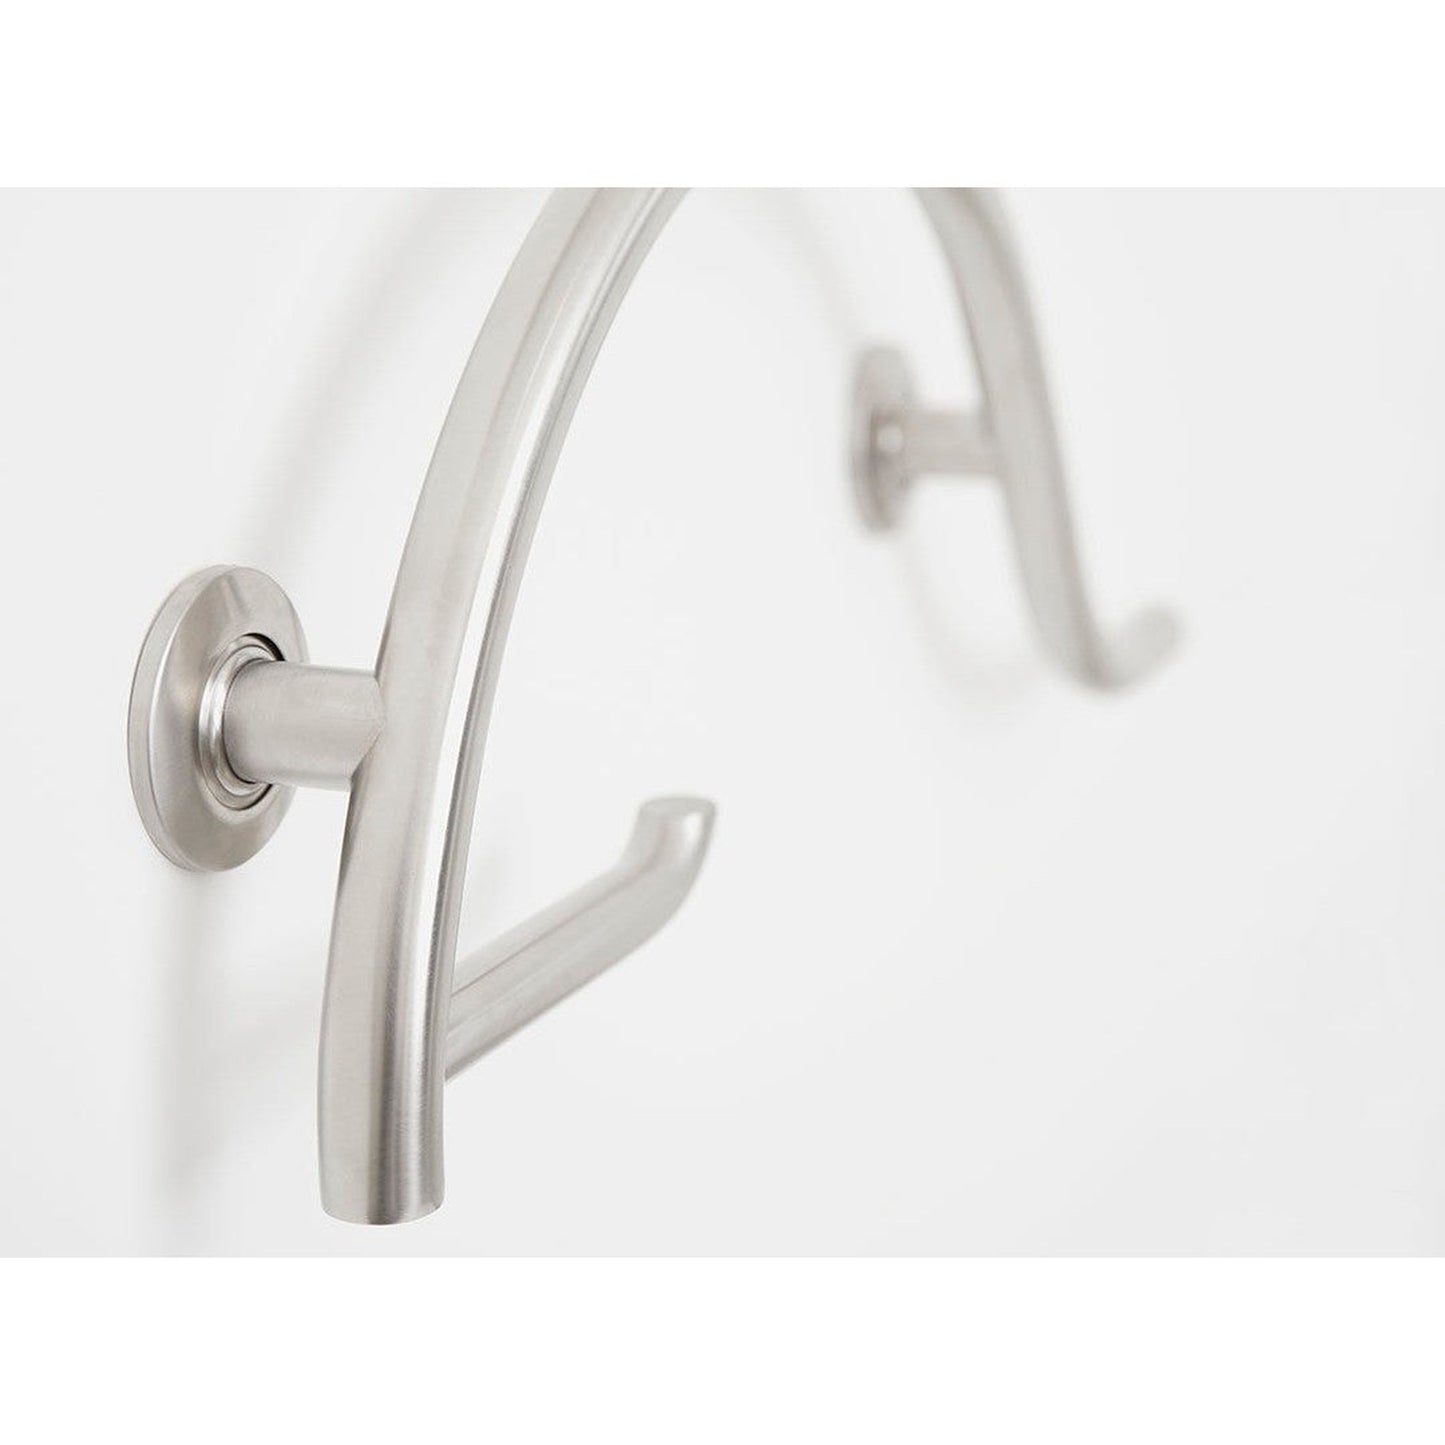 Seachrome Lifestyle & Wellness 30" Satin Stainless Steel 1.25 Diameter Concealed Flange Left-Handed Configuration Pismo Curved Grab Bar With Toilet Paper Holder